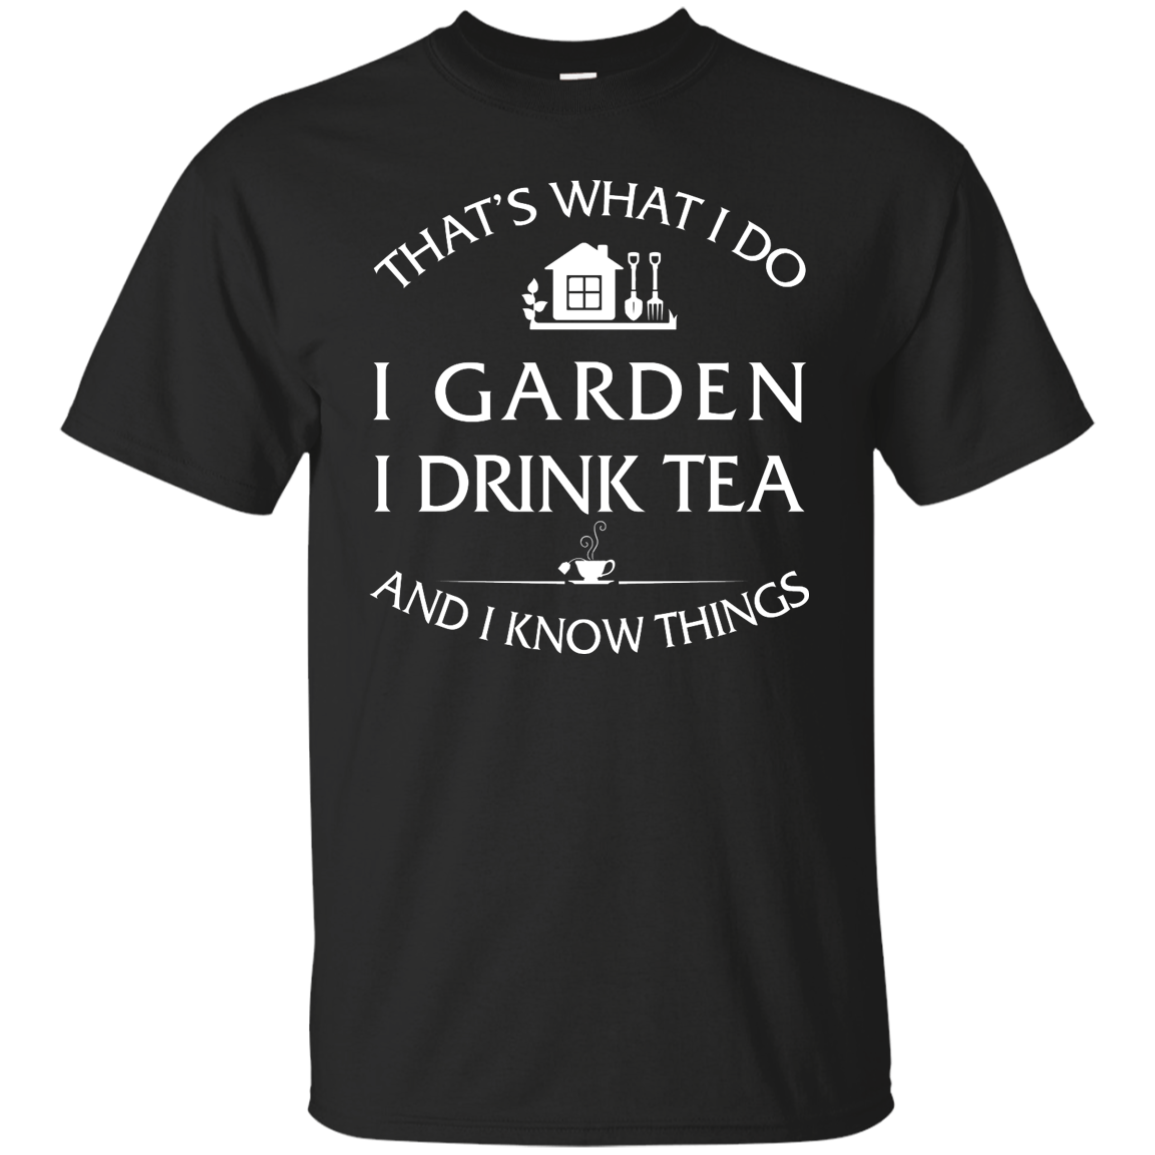 I Garden I Drink Tea and I Know Things Shirt, Hoodie, Tank